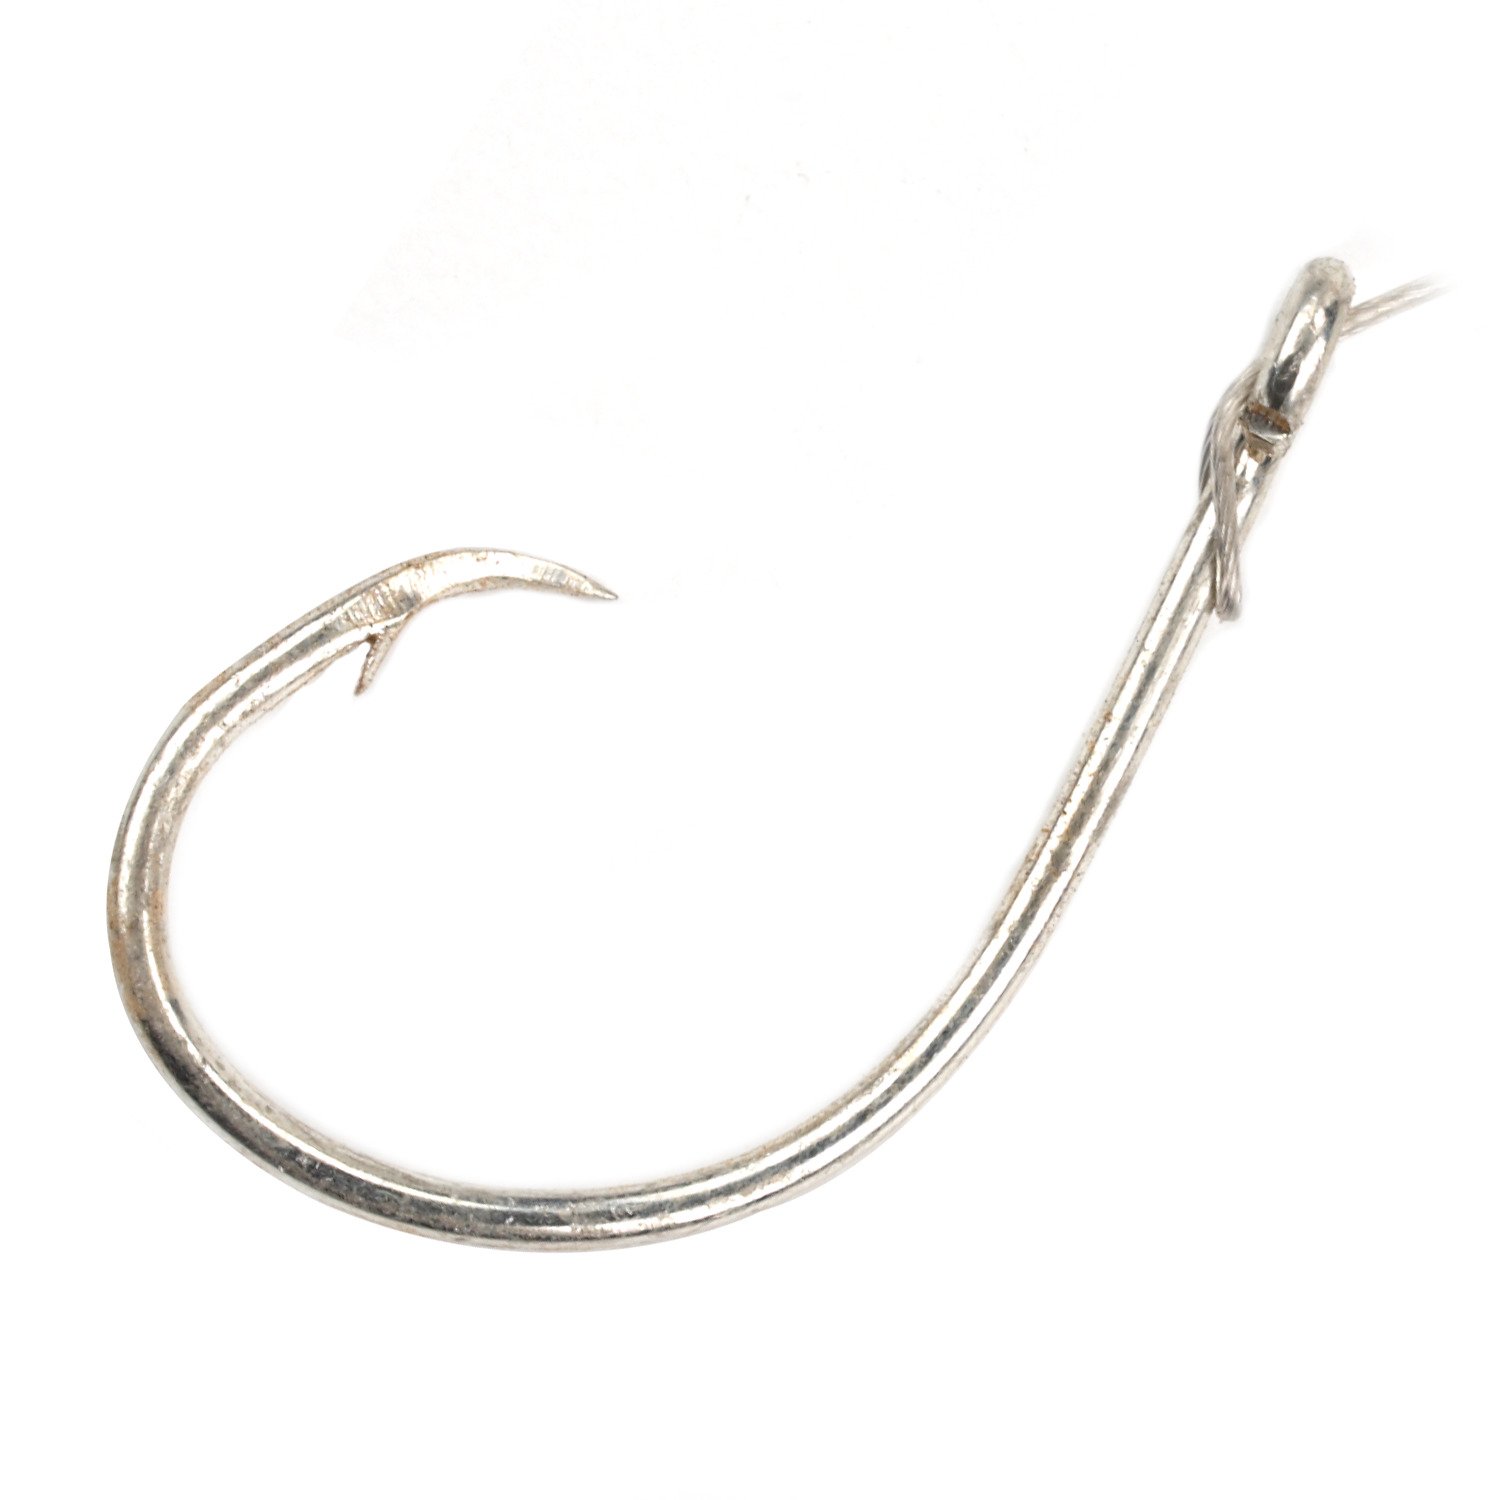 Academy Sports + Outdoors Eagle Claw O'Shaughnessy Trot Line Single Hooks  50-Pack